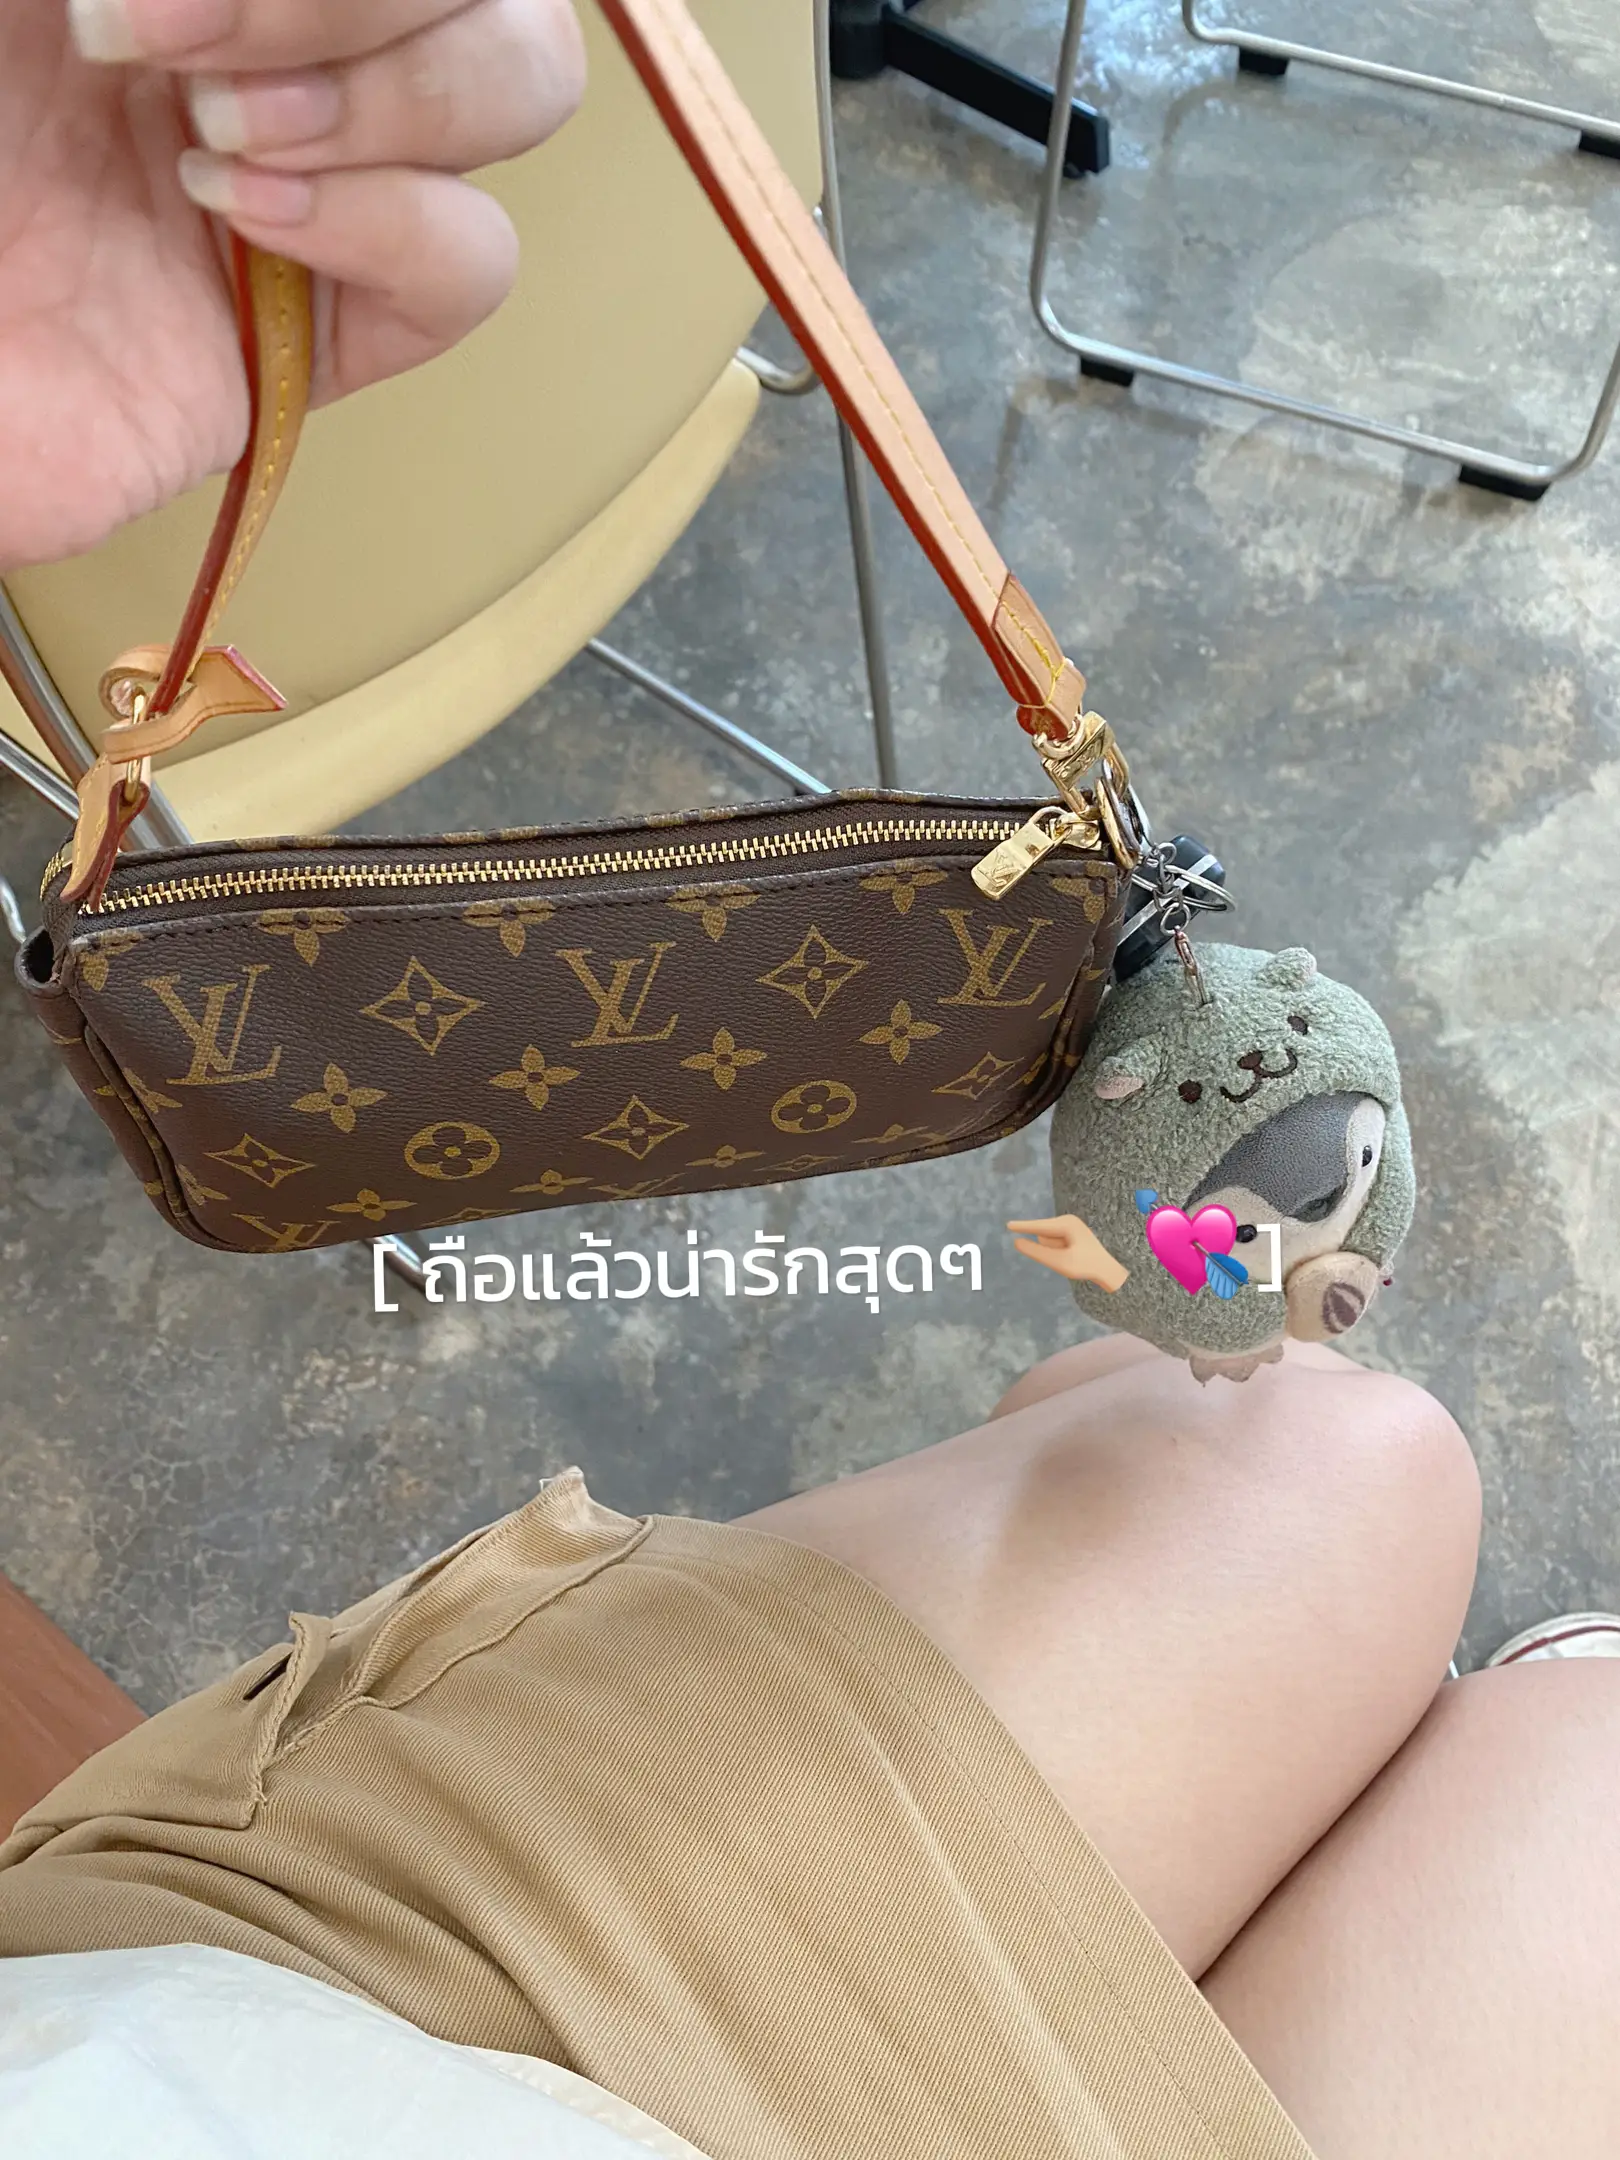 LOUIS VUITTON CLUNNY MINI UNBOXING  FIRST IMPRESSION & WHAT FITS 